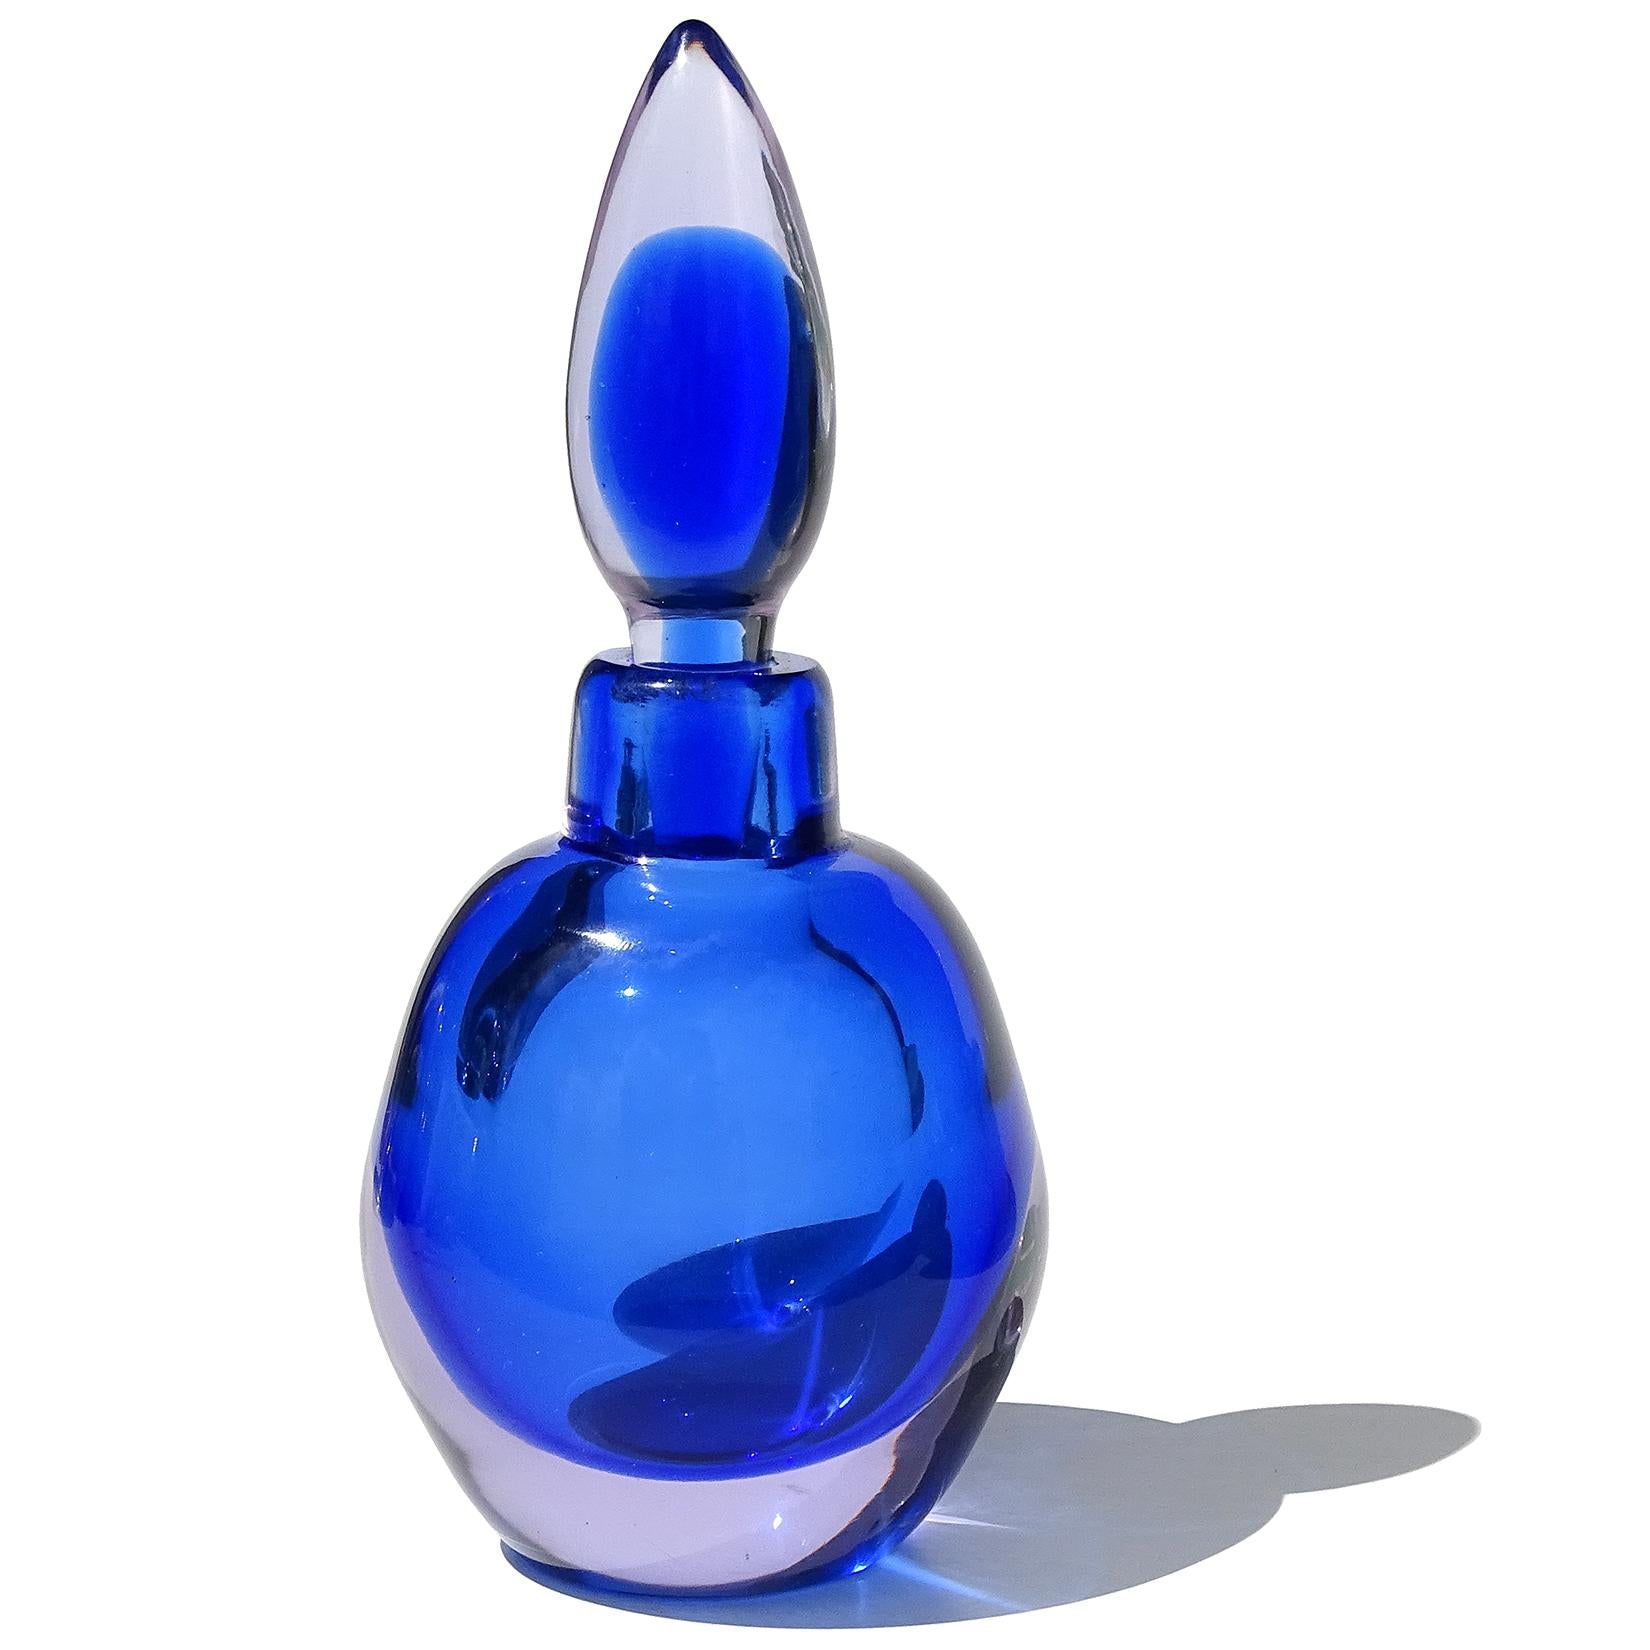 Beautiful vintage Murano hand blown Sommerso sapphire blue and light lavender Italian art glass perfume bottle. The piece is documented to the Seguso Vetri d'Arte company. It has an original tear drop stopper with it. The body of the perfume has an